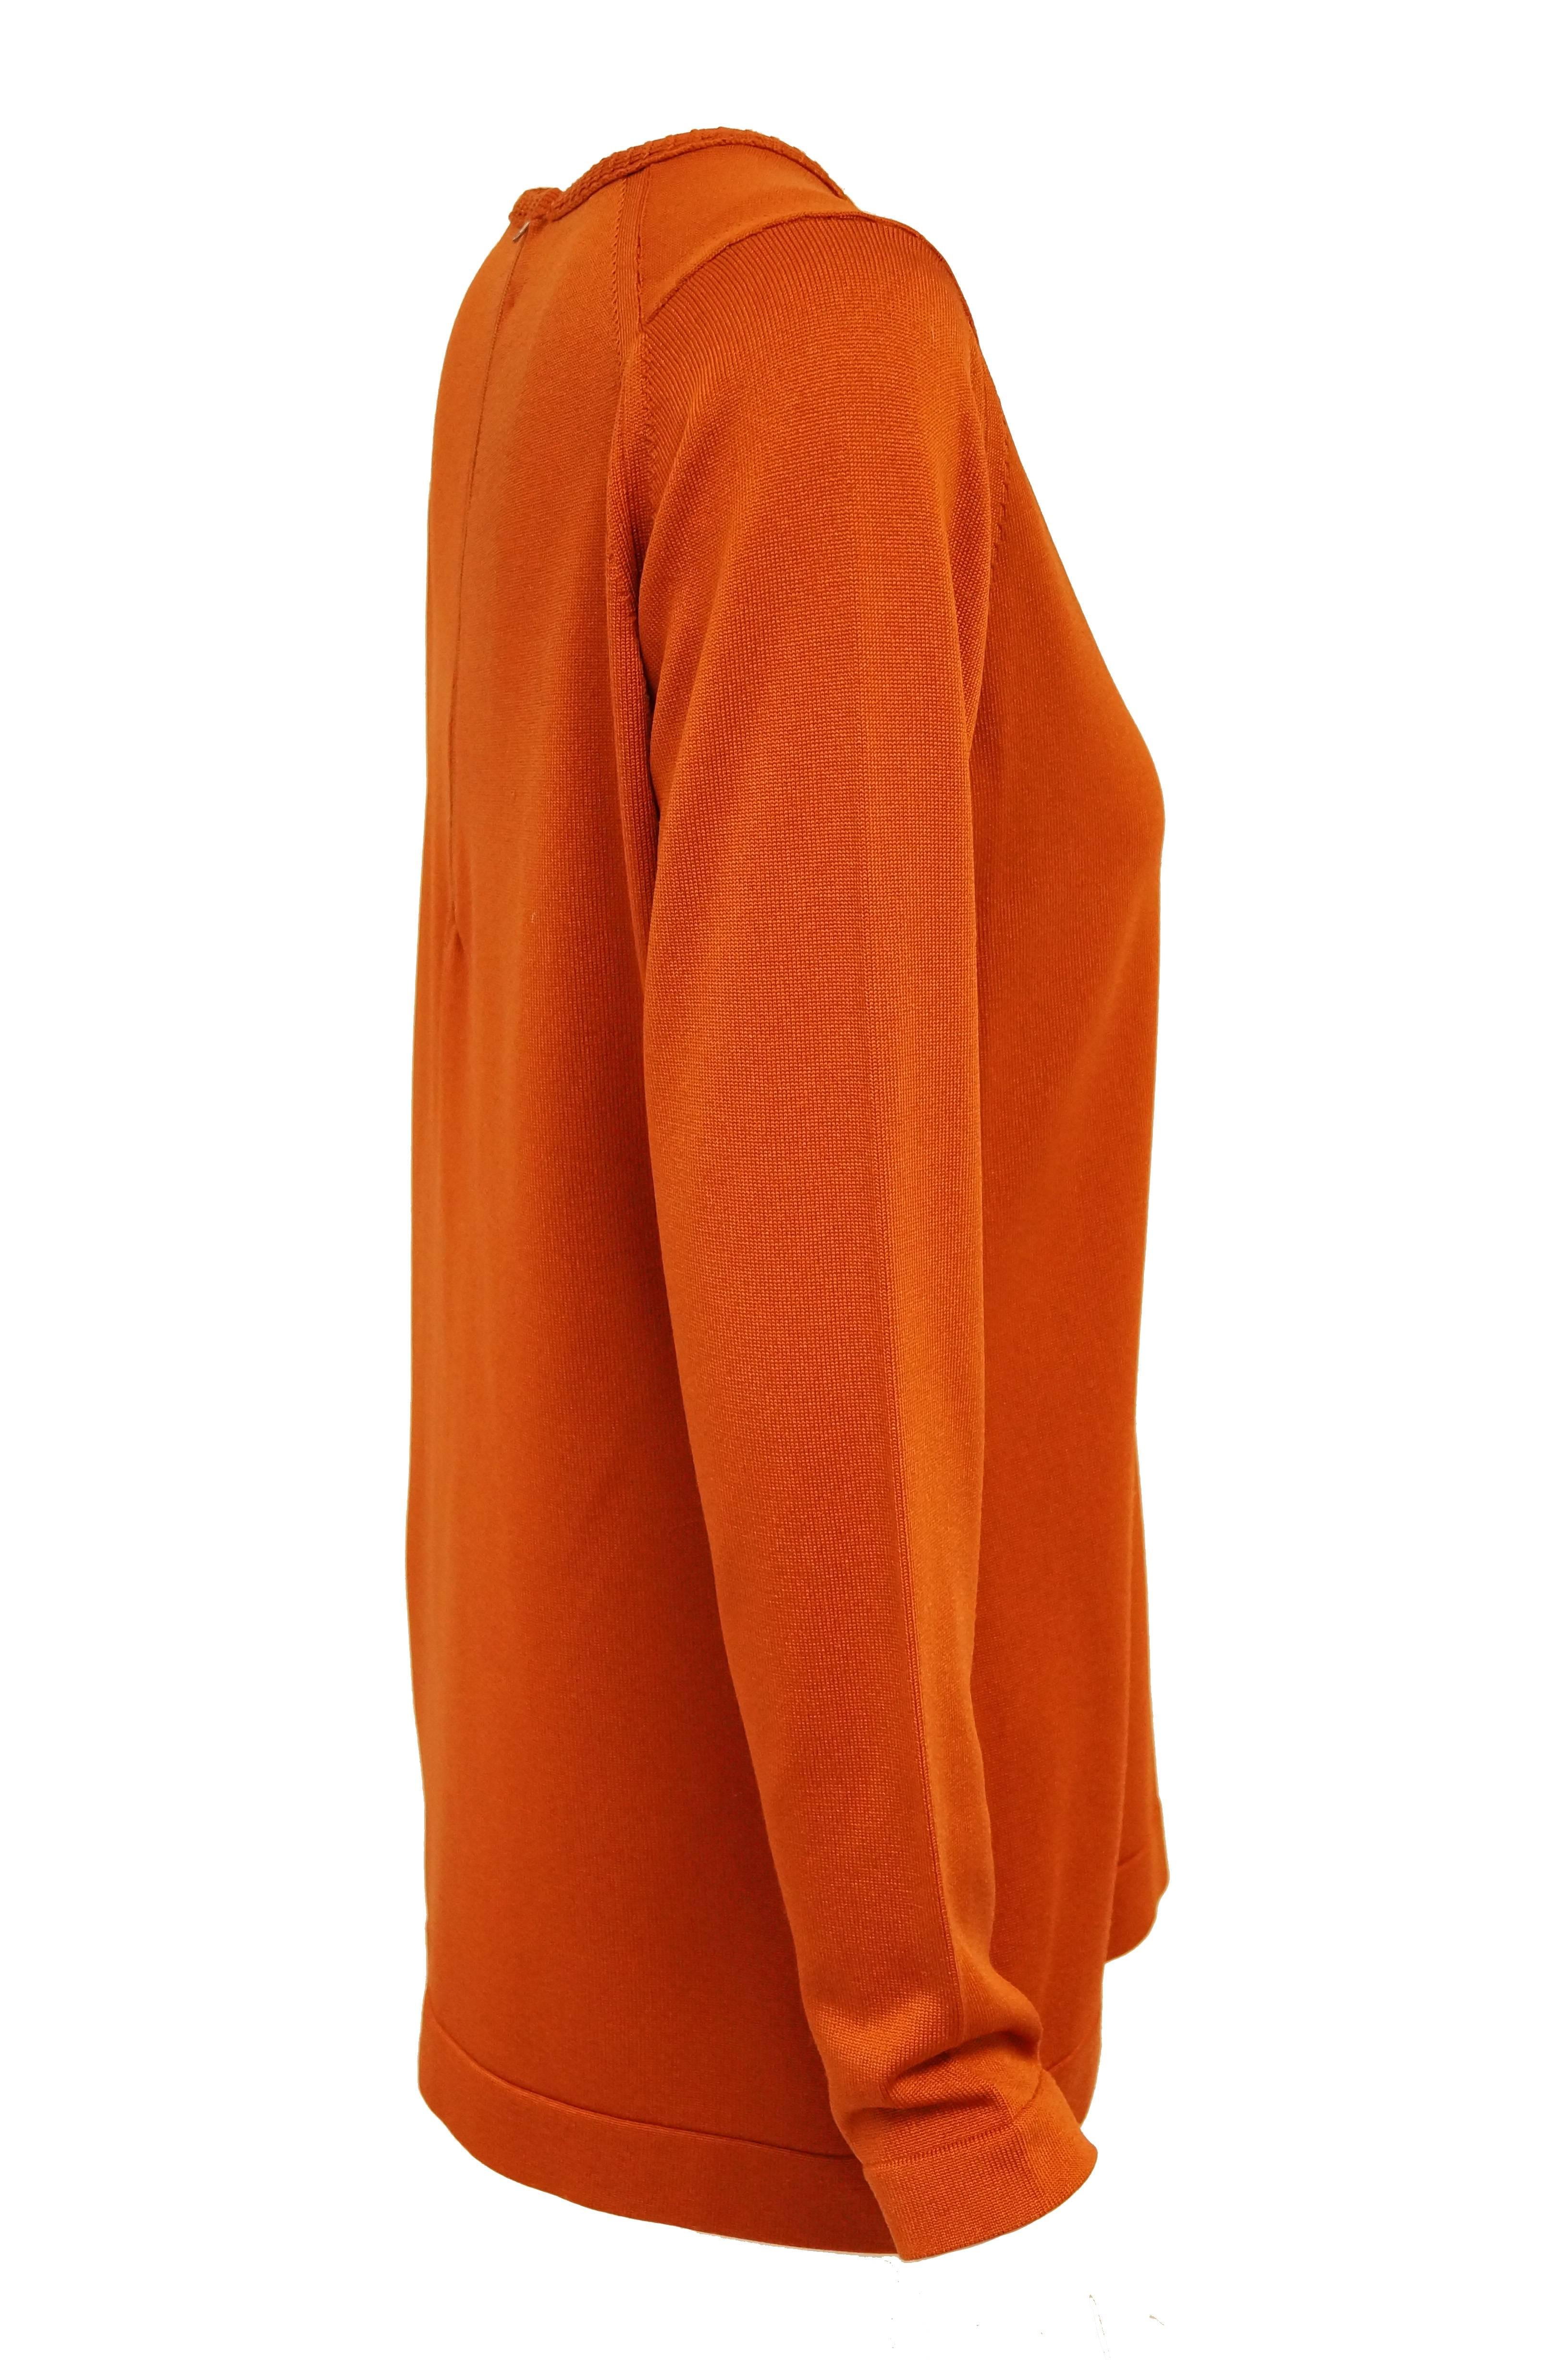 Givenchy Sport Tangerine Orange Pullover Sweater, 1970s  4